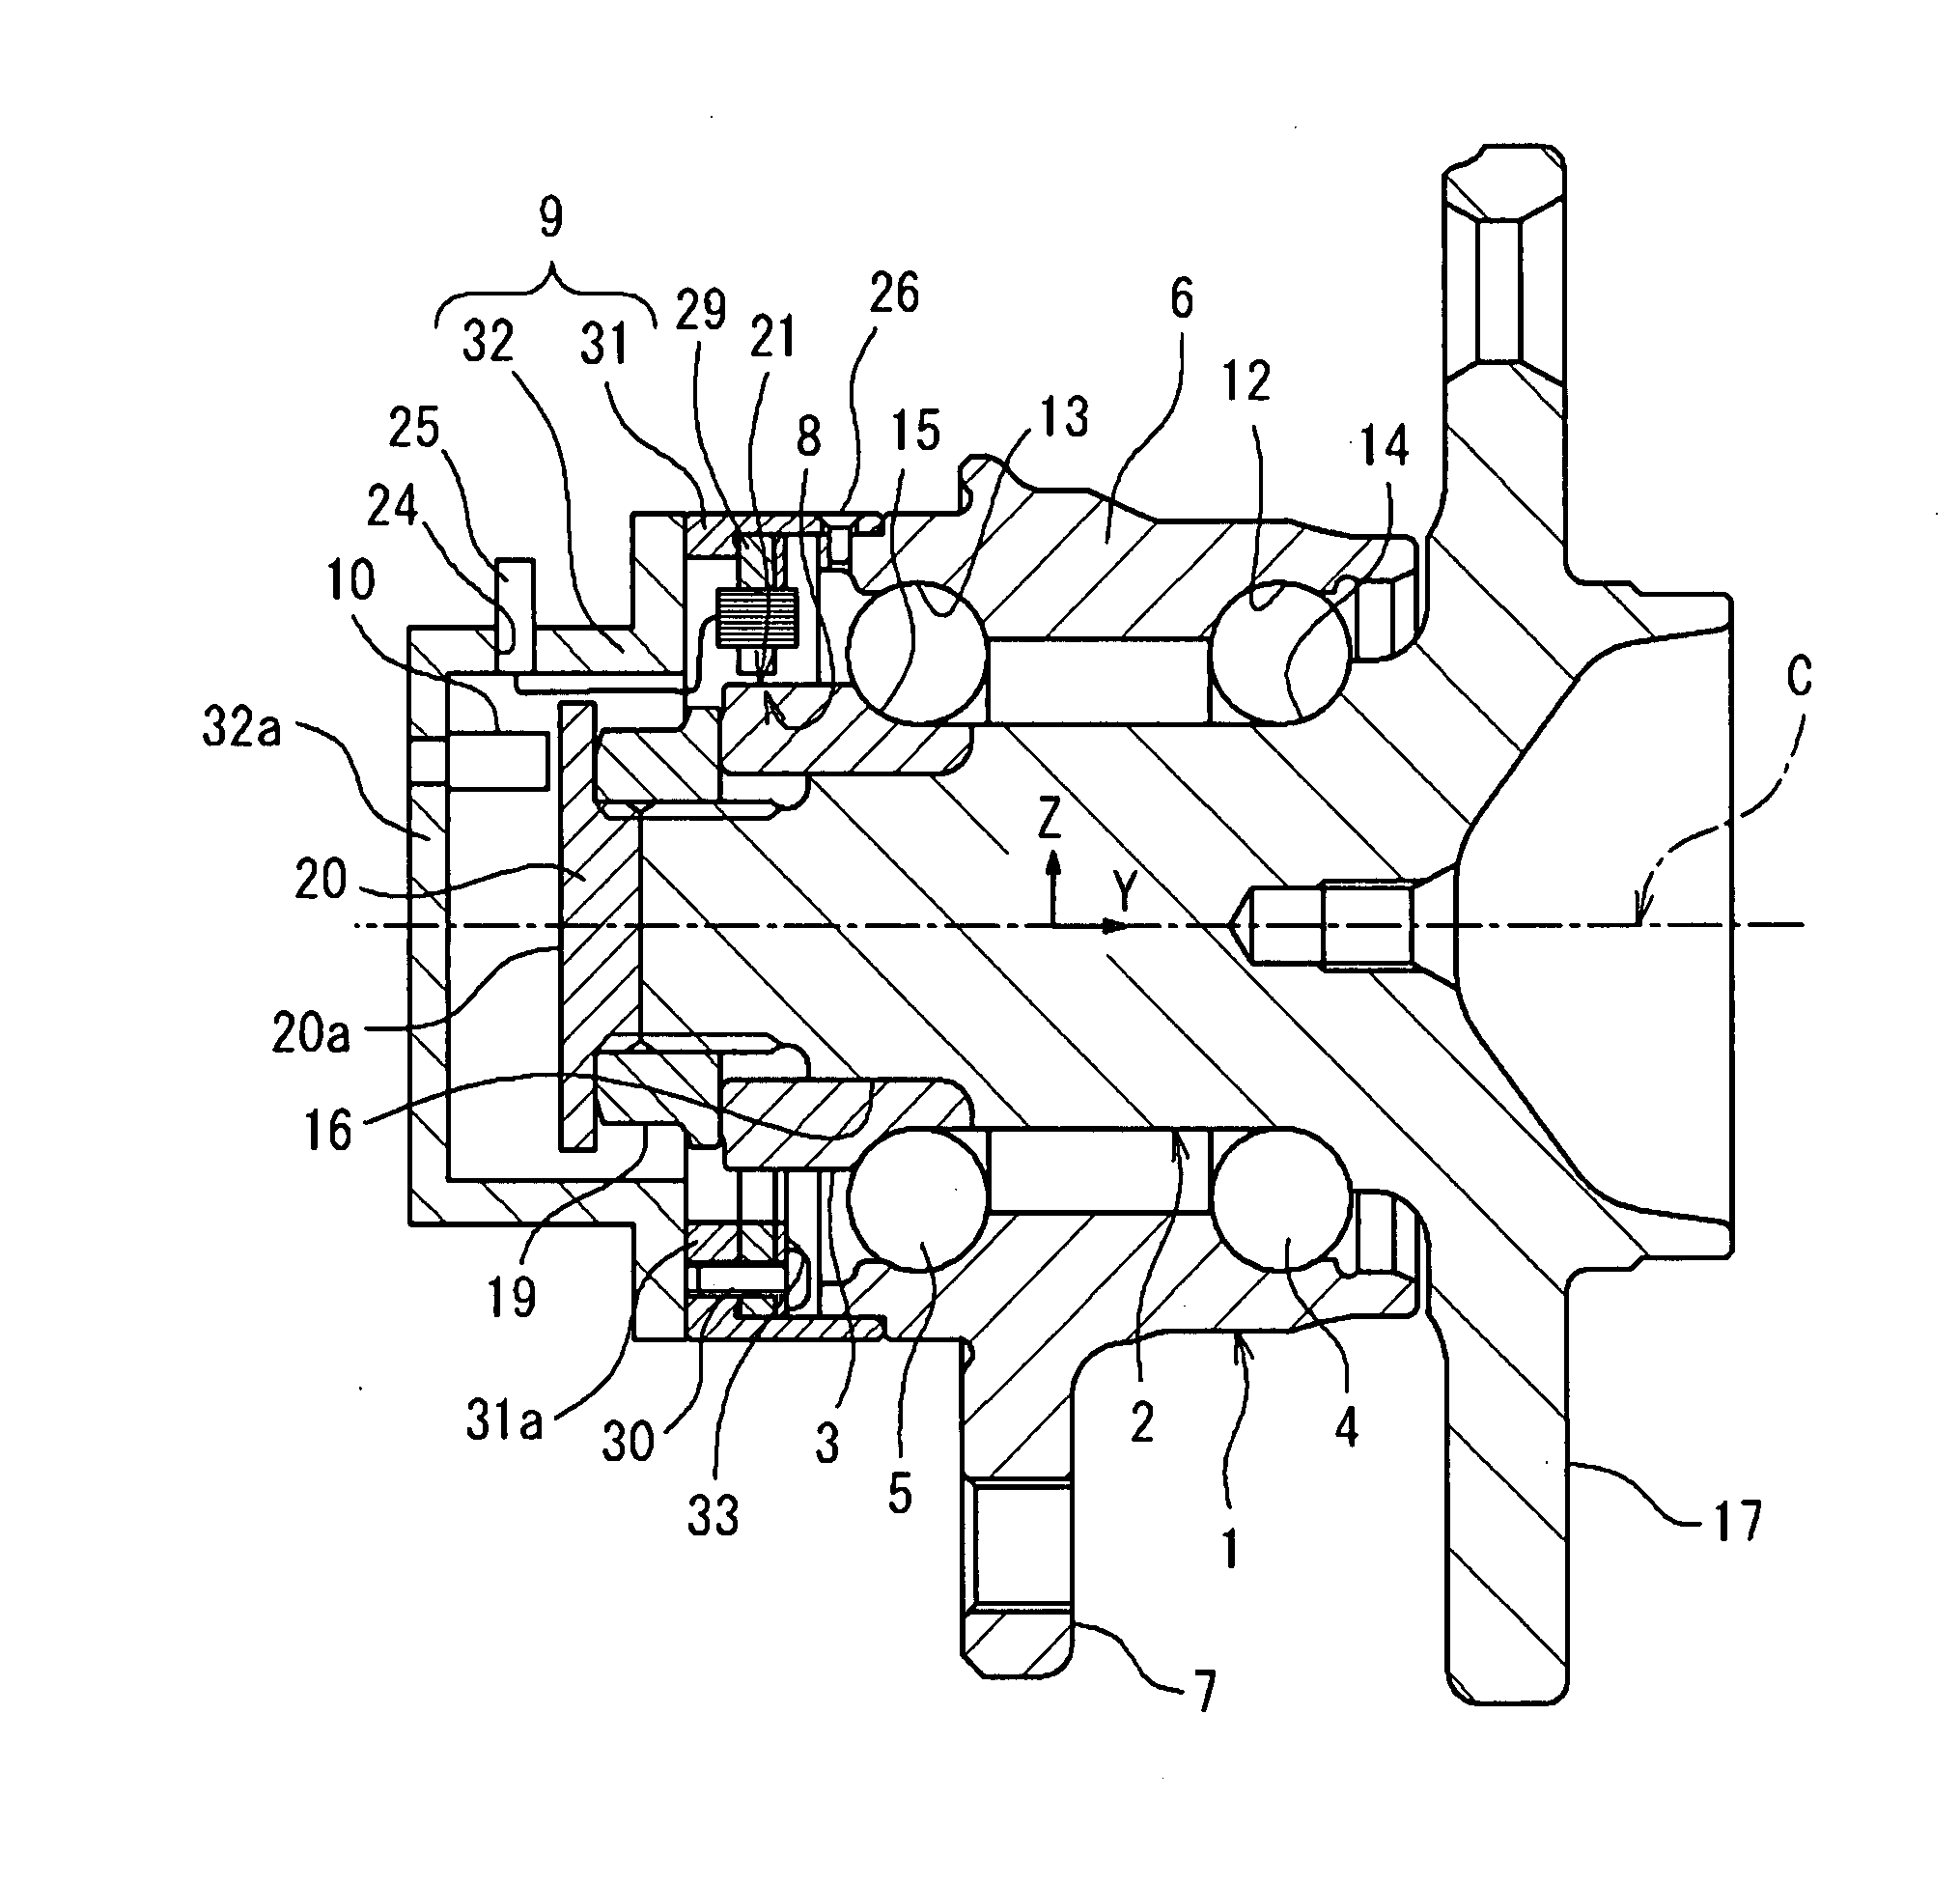 Sensor-equipped rolling bearing assembly